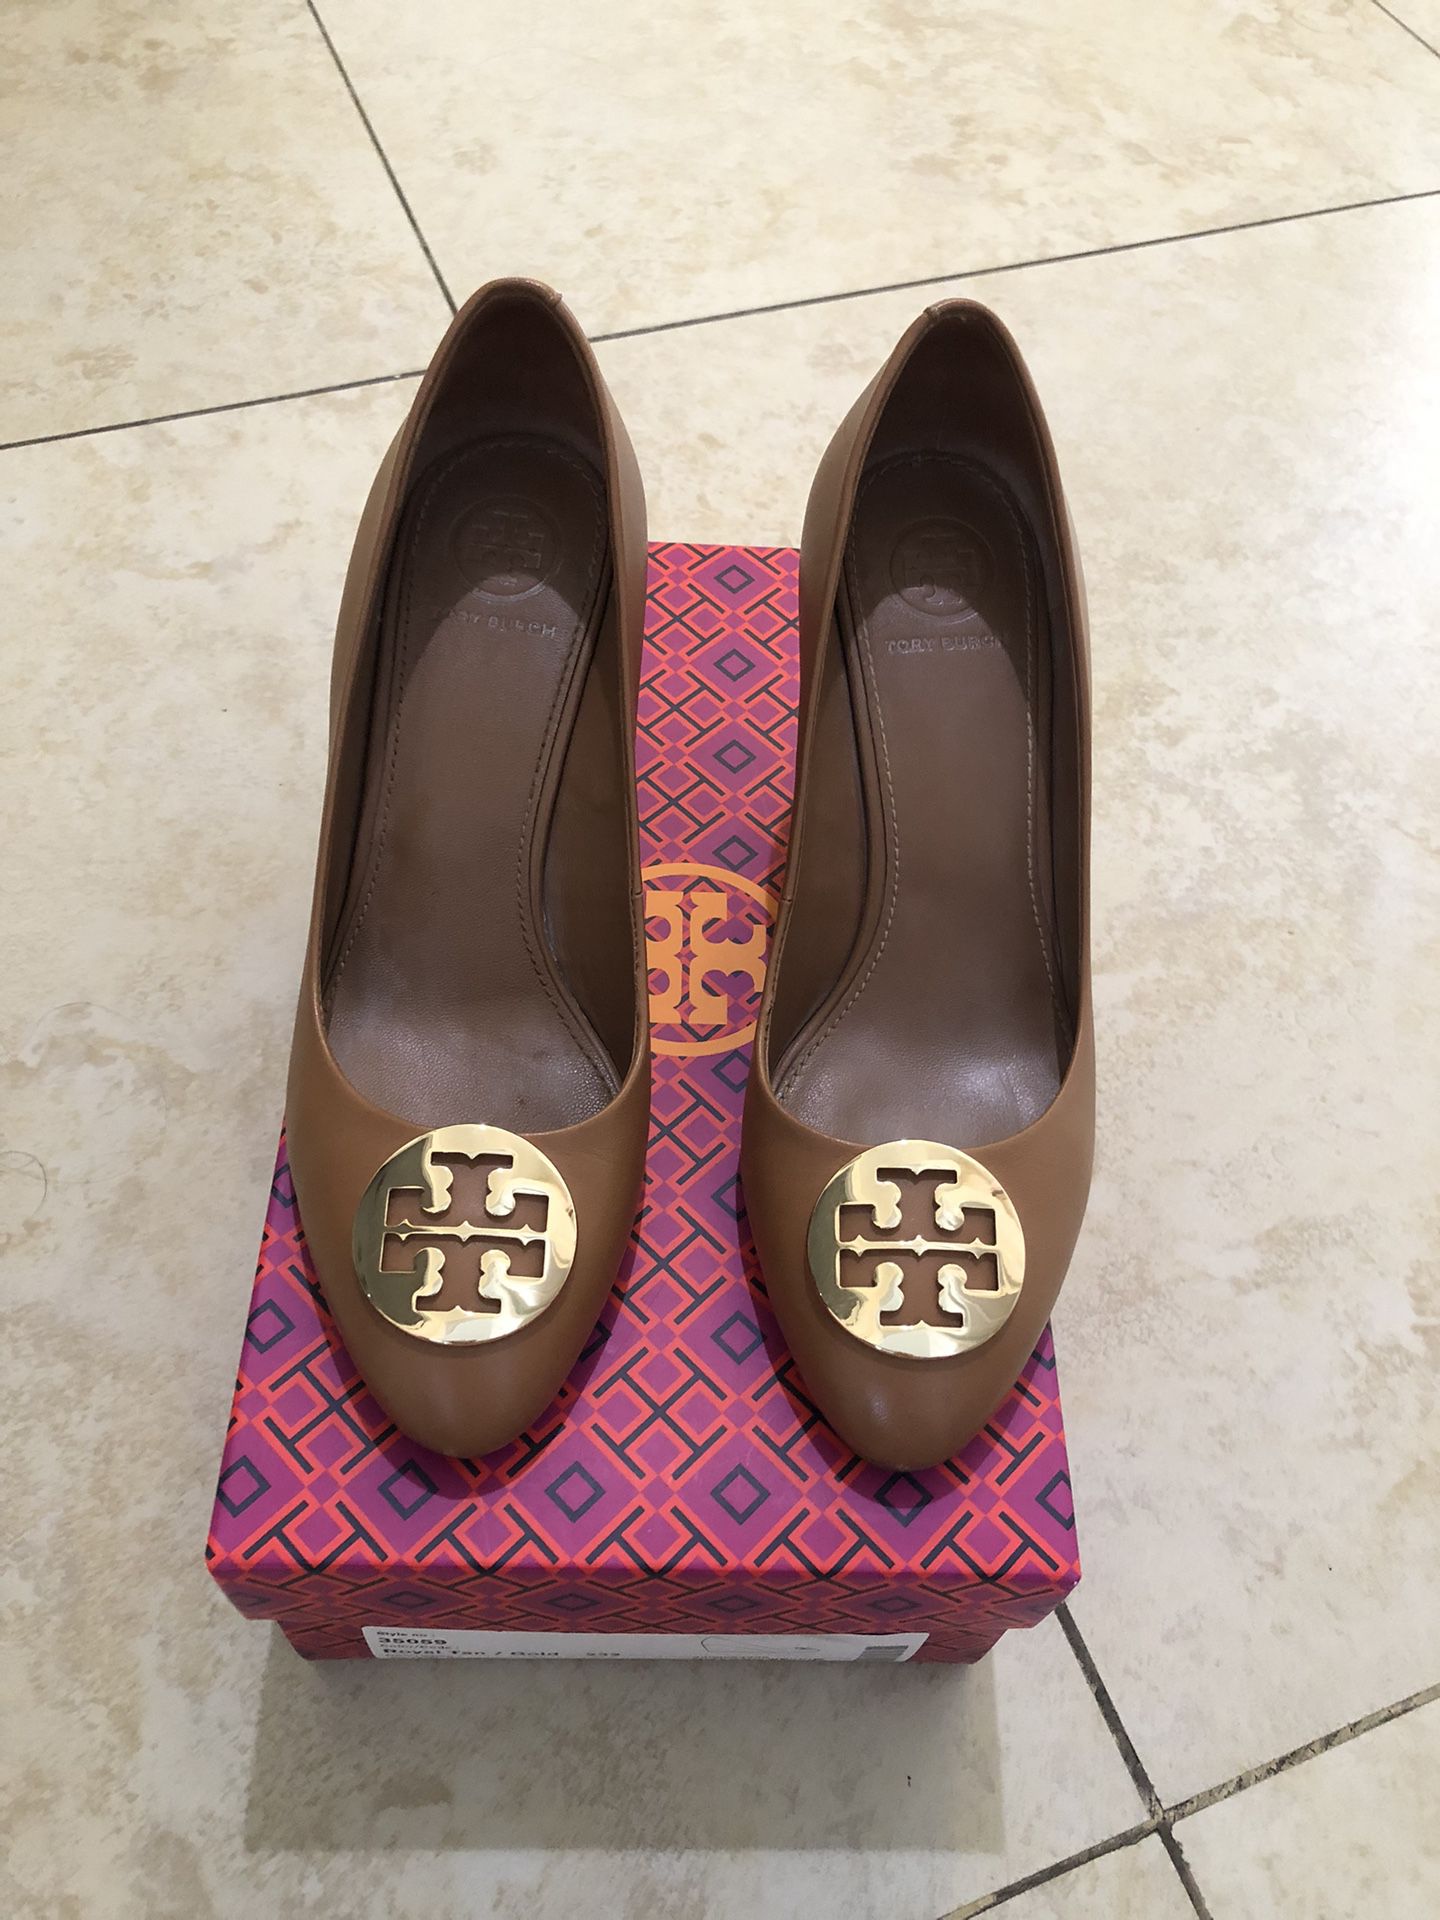 Tory Burch Wedges Shoes